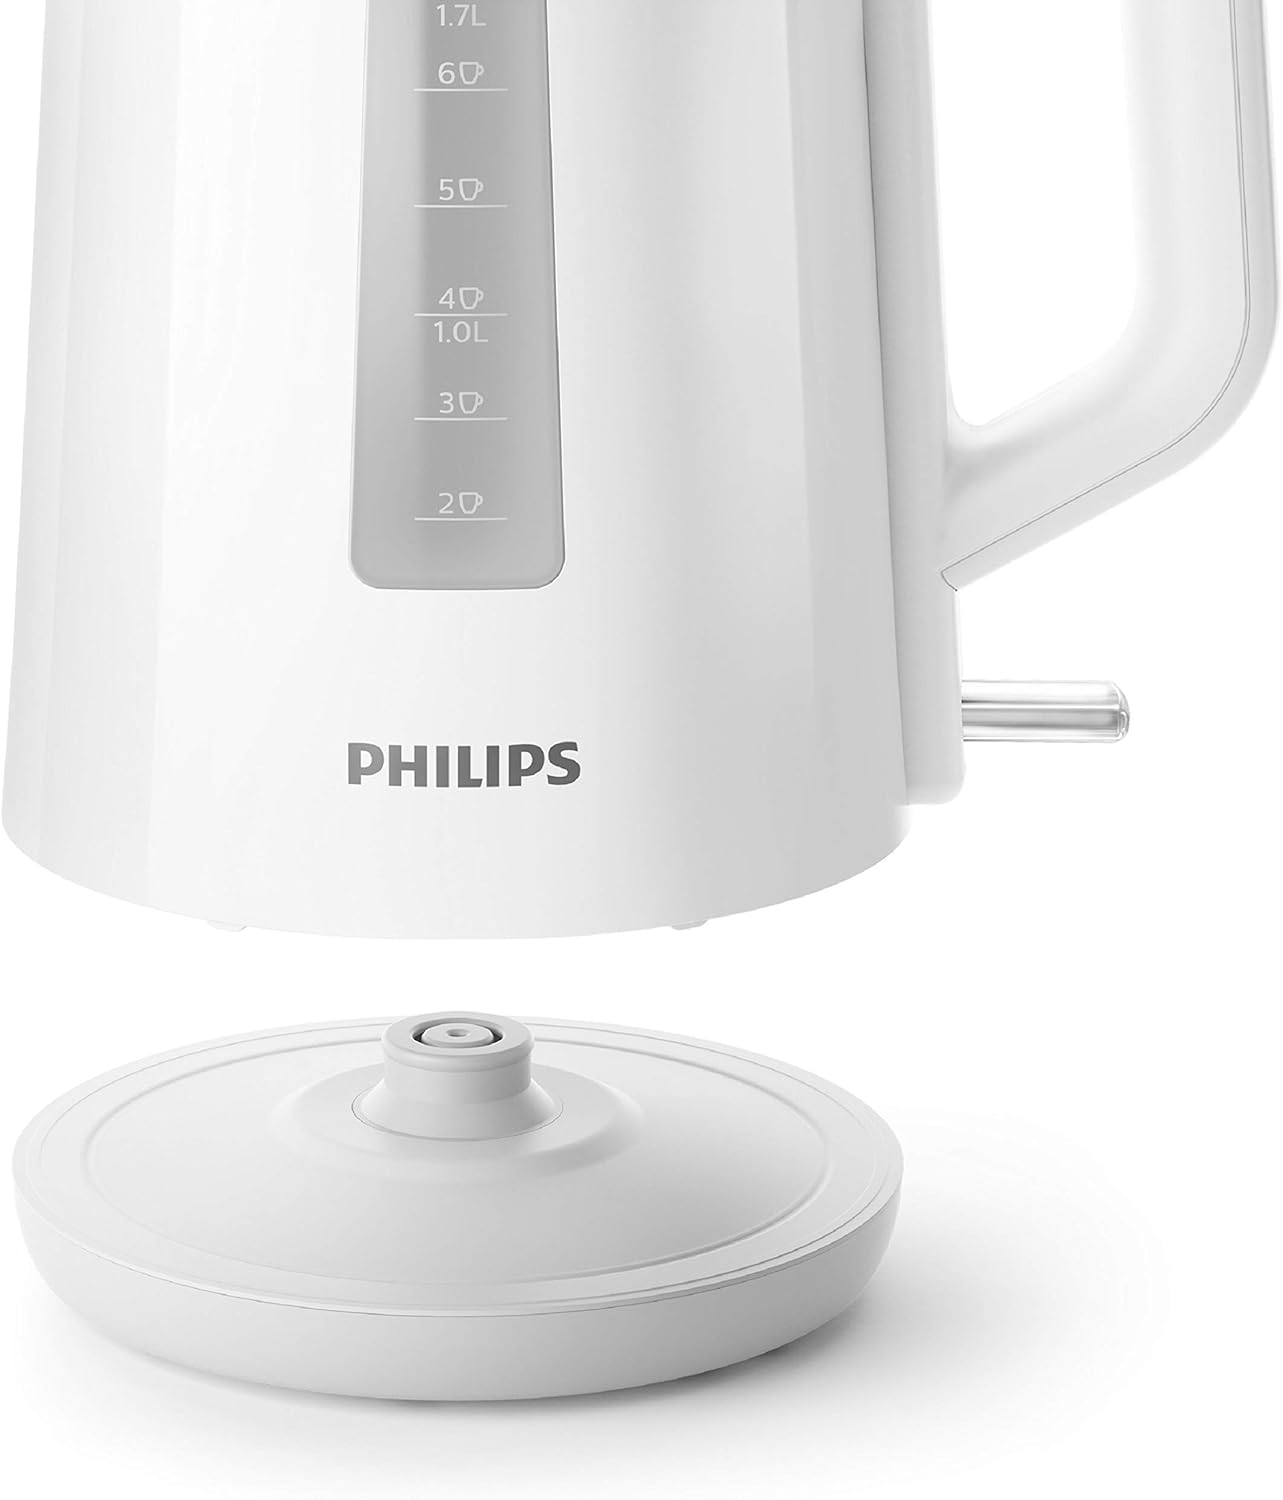 PHILIPS Electric Kettle 1.7 Litre - Plastic - Frequency 50/60 Hz - HD9318/01